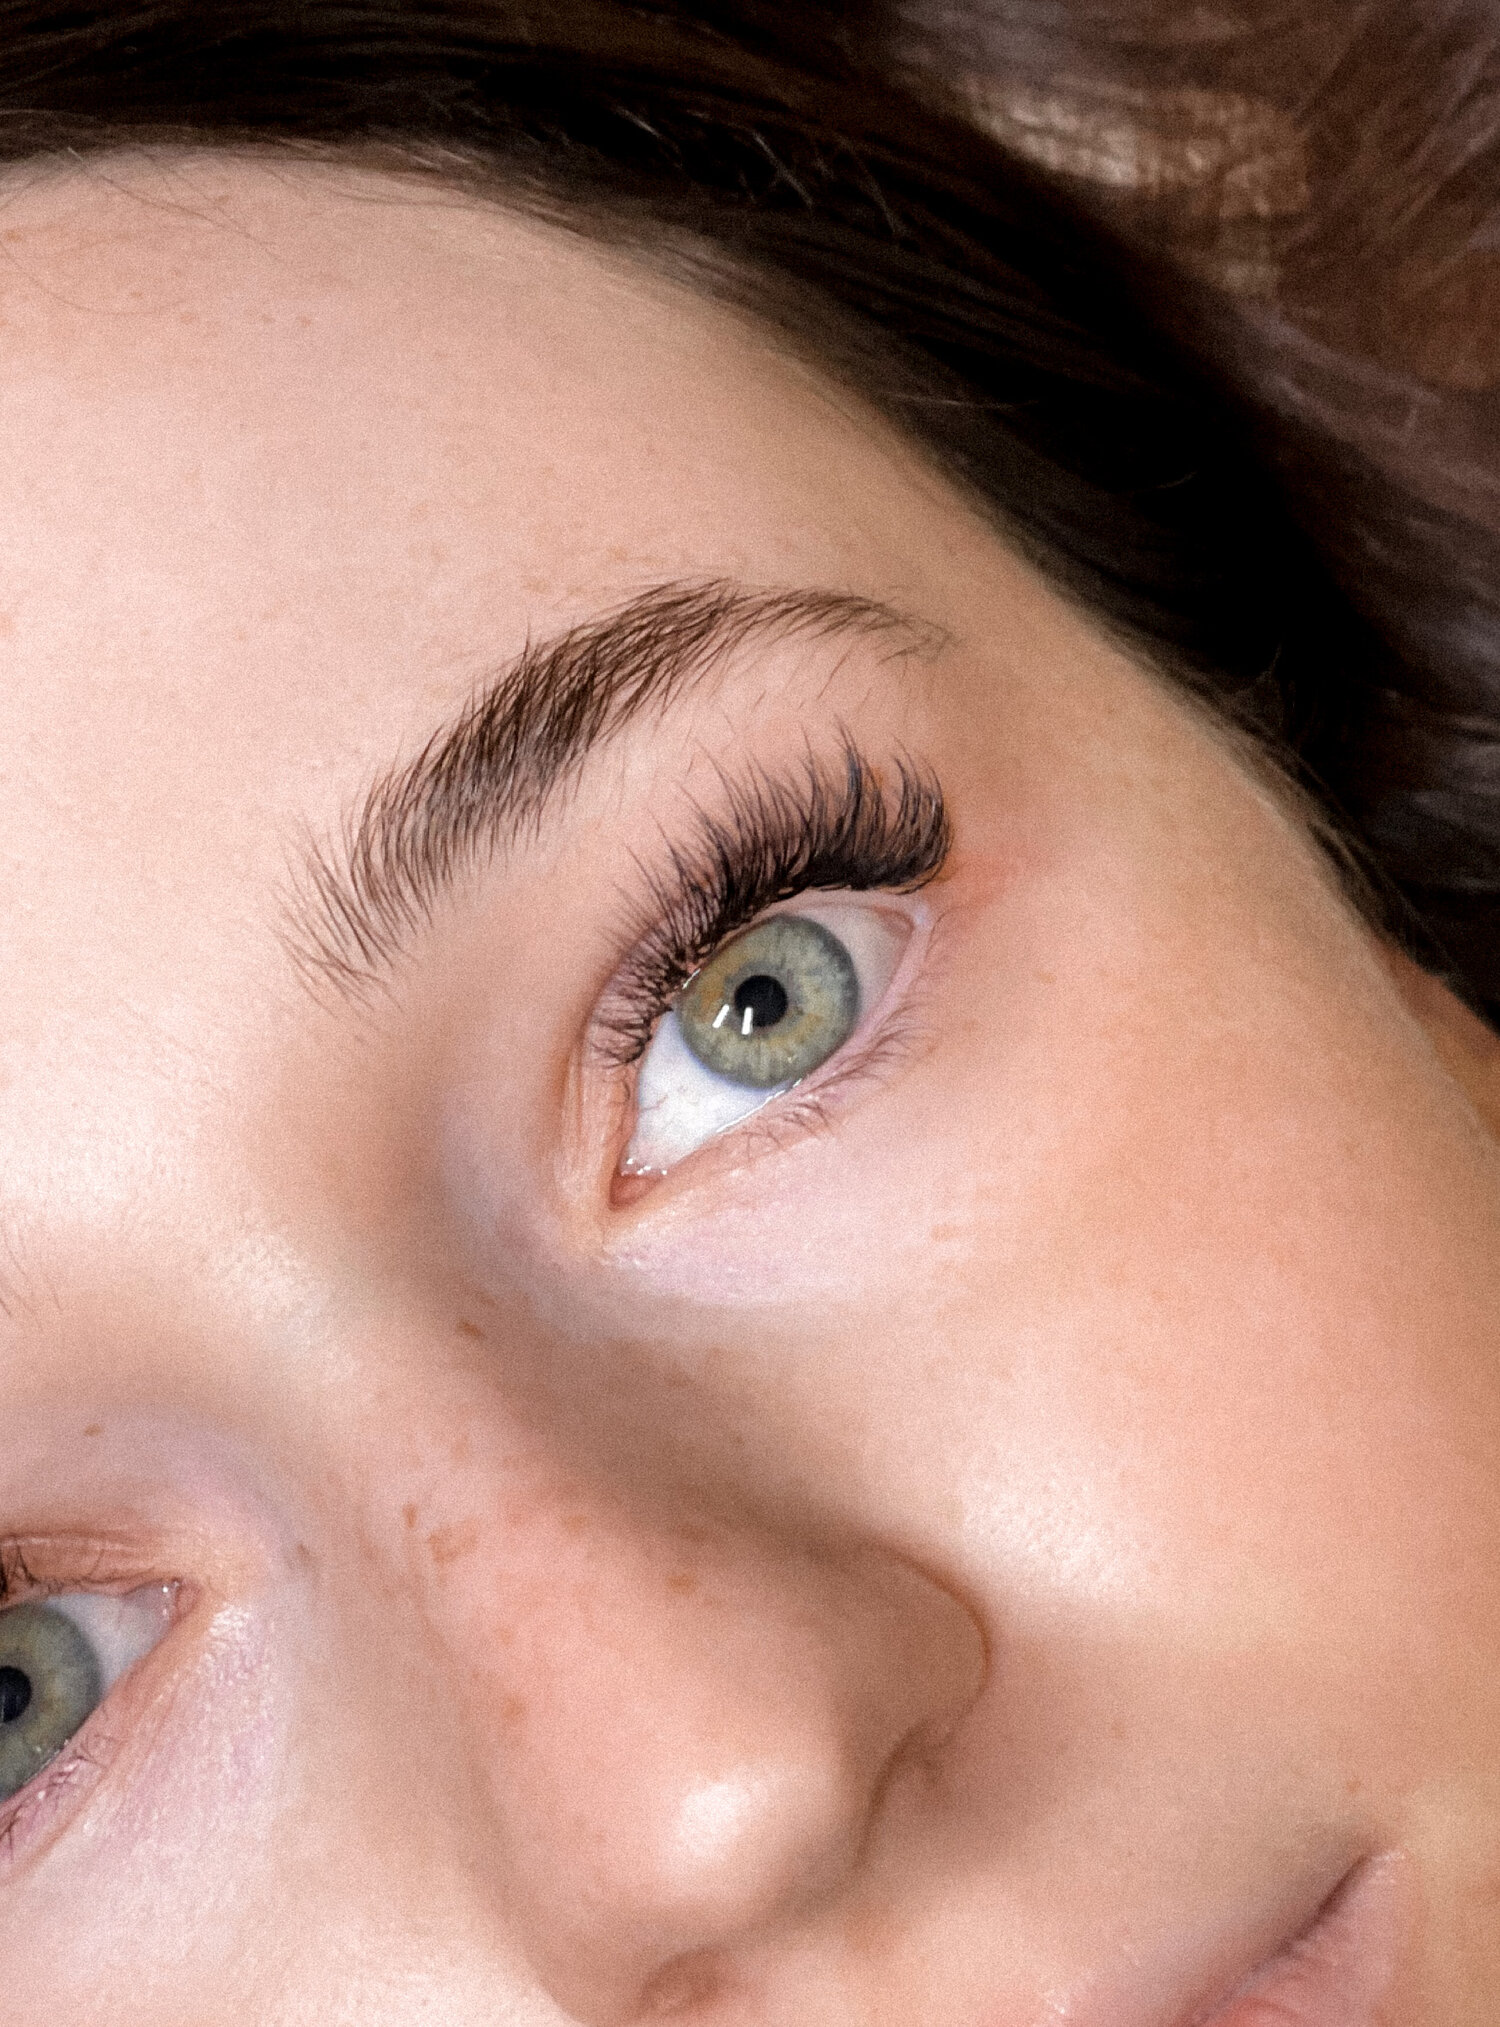 Light, wispy hybrid lashes. A mix of classic and volume extensions